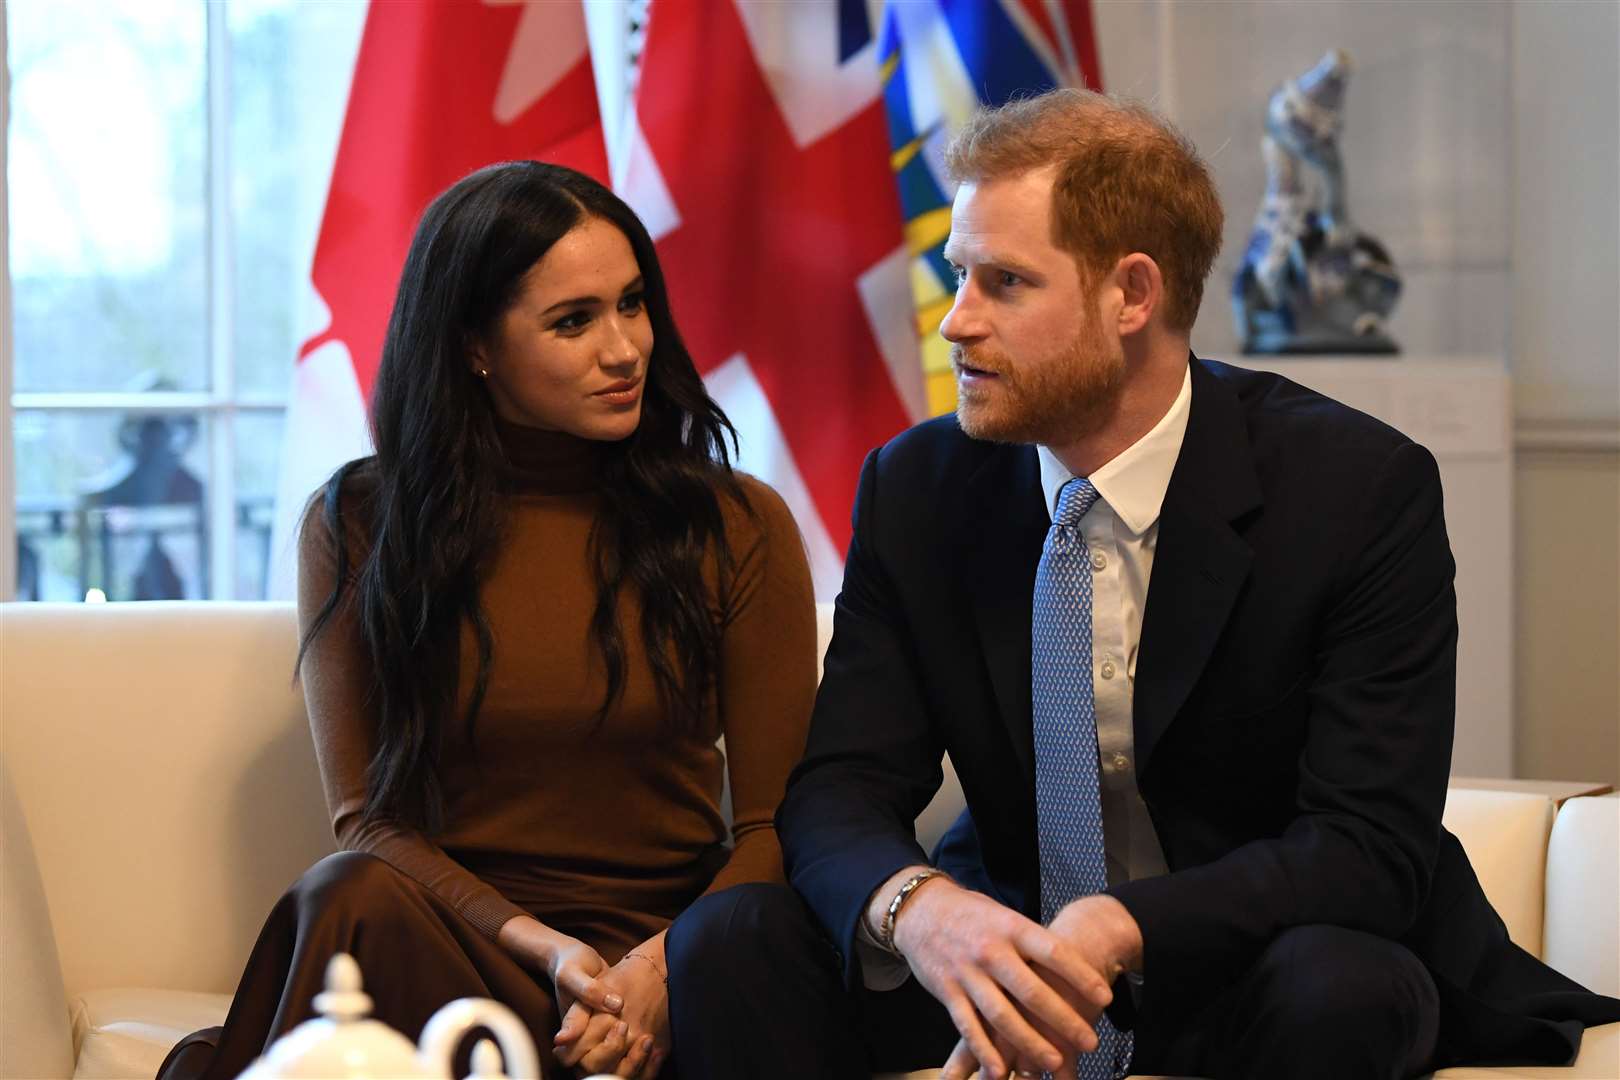 Harry said he and Meghan are dedicated to a life of service (Finnbarr Webster/PA Wire)